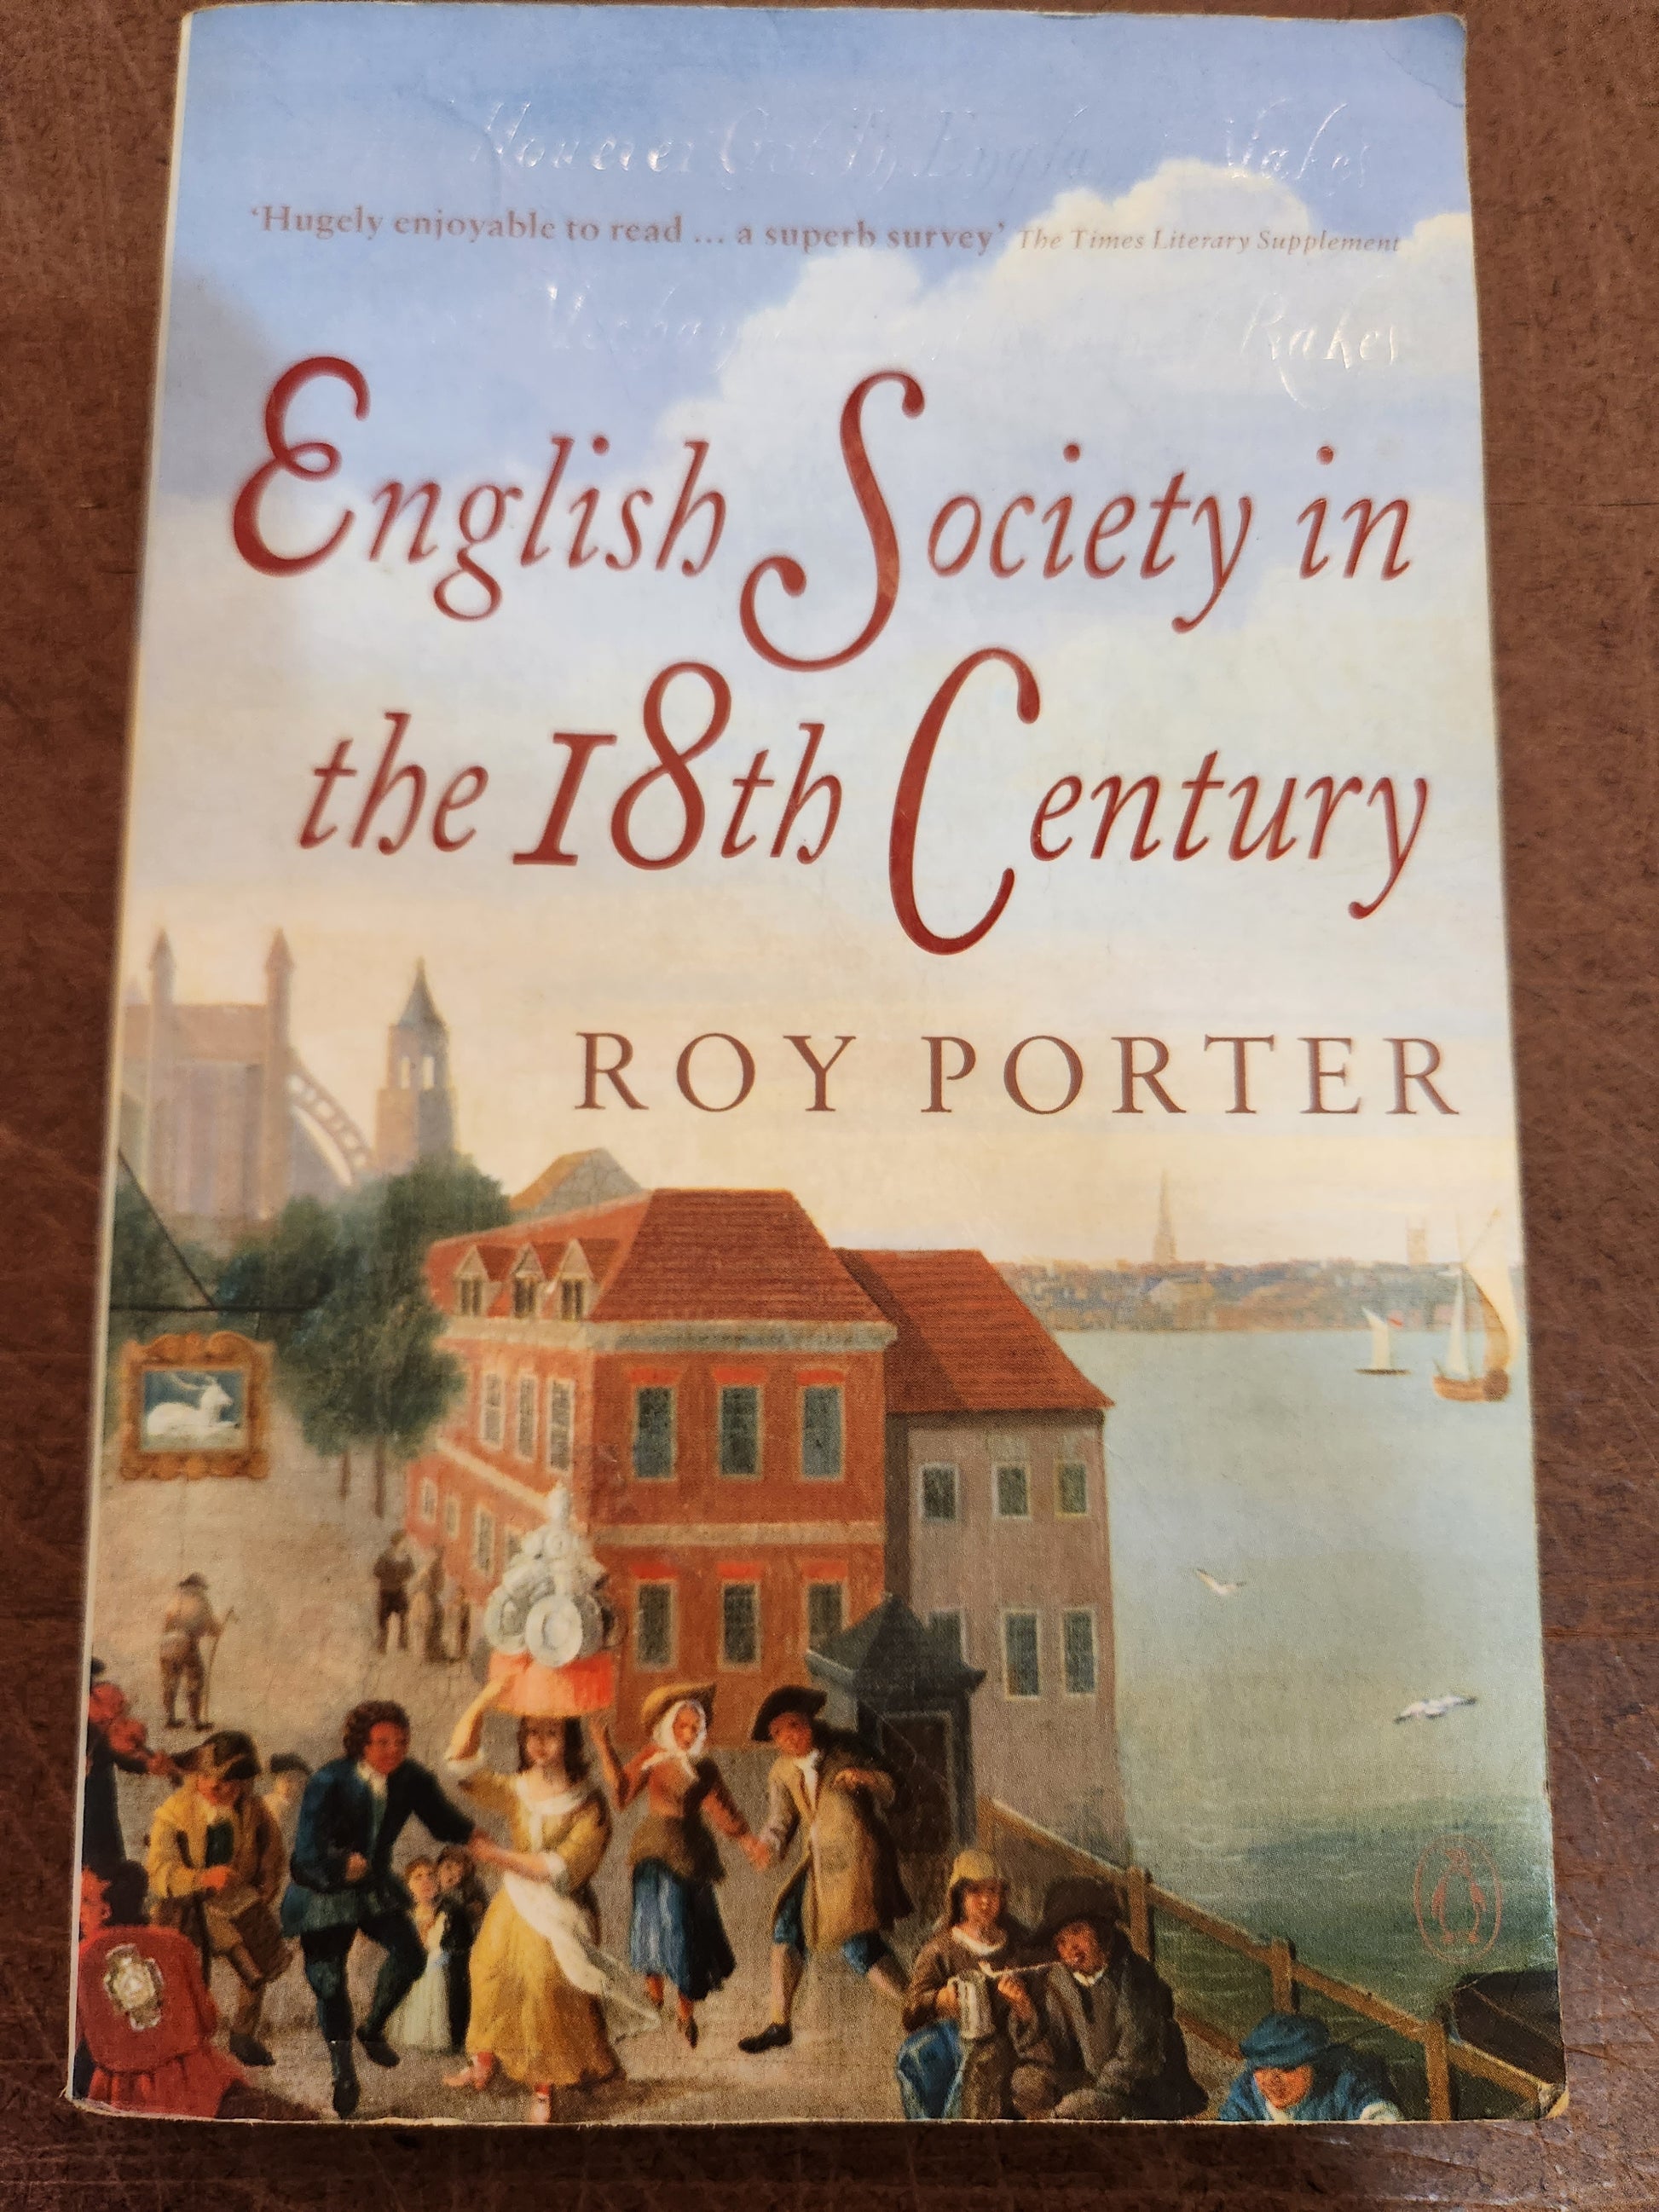 "English Society In the Eighteenth Century" by Roy Porter - Dead Tree Dreams Bookstore